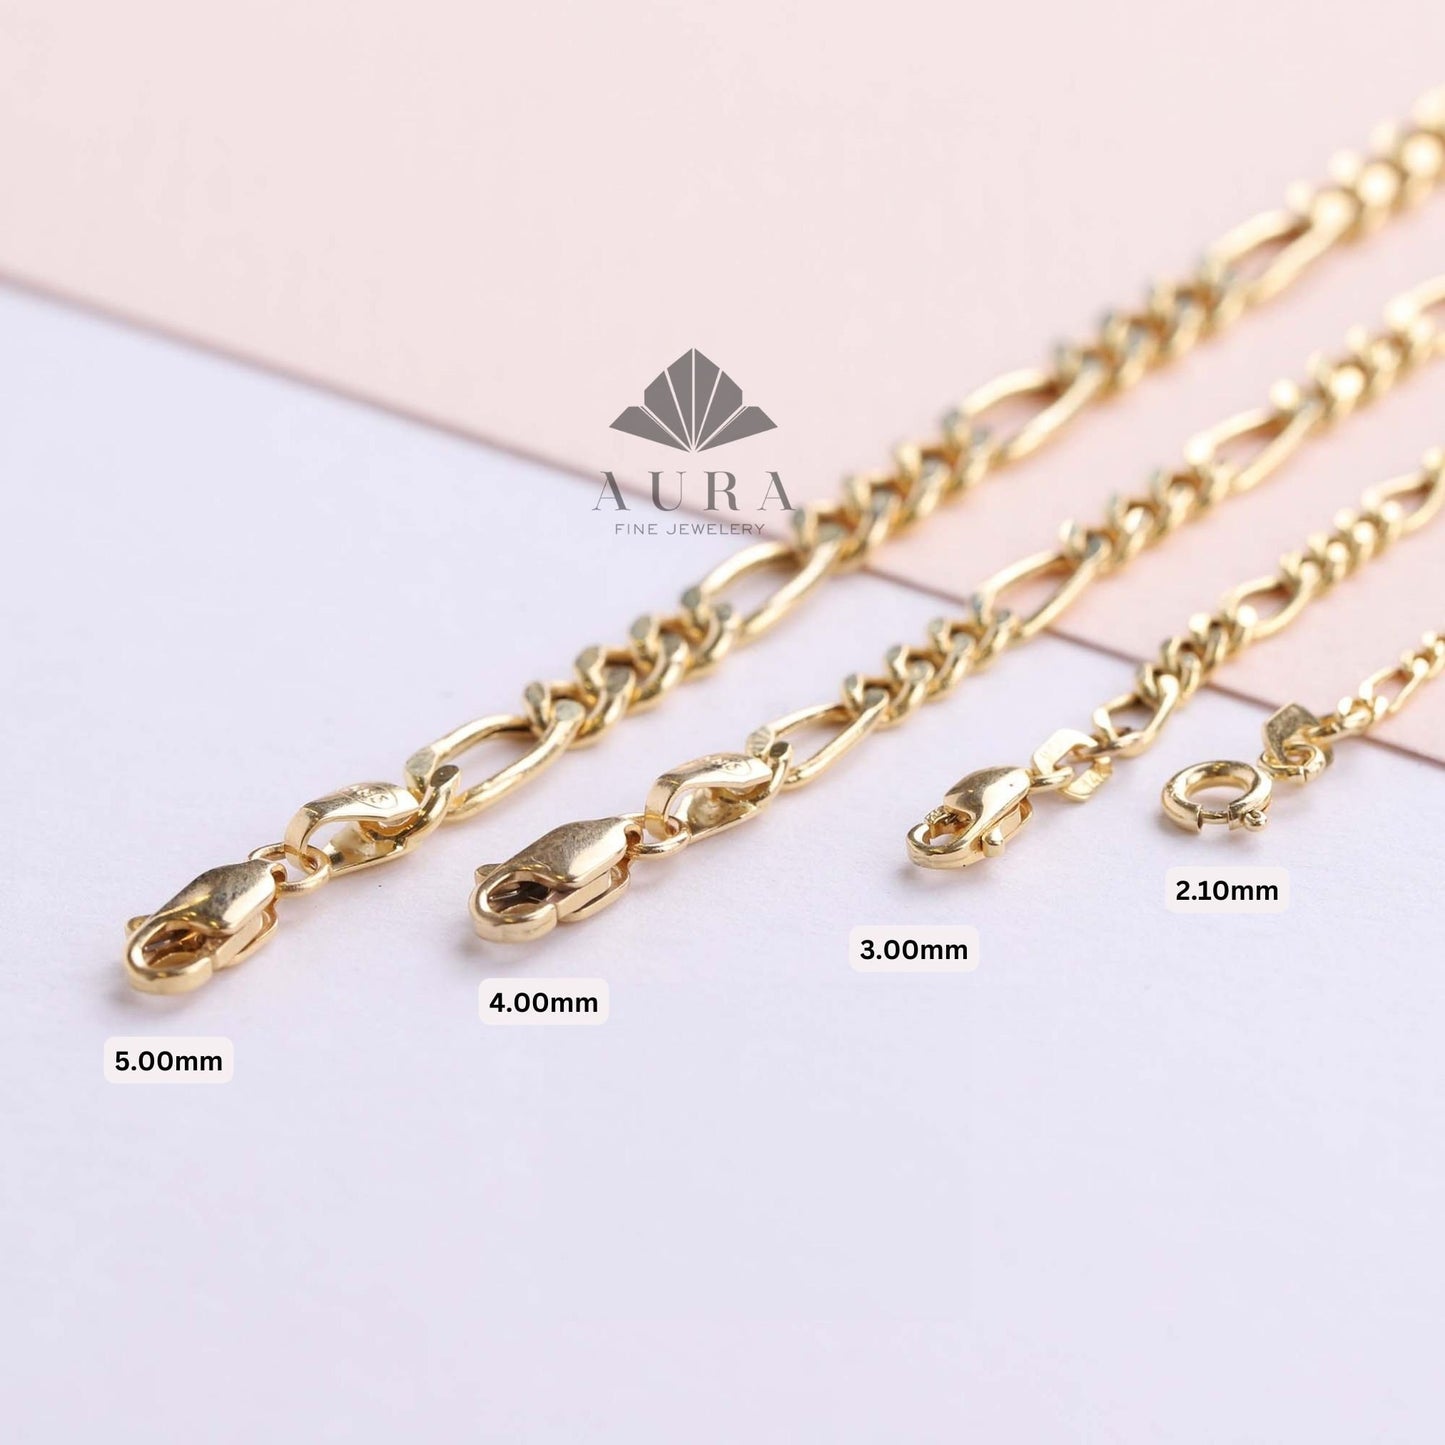 14K Gold Figaro Chain Necklace, 2mm 3mm 4mm 5mm Figaro Chain Necklace, Genuine Gold Chain Choker, Thick Figaro Necklace, Man Woman Necklace